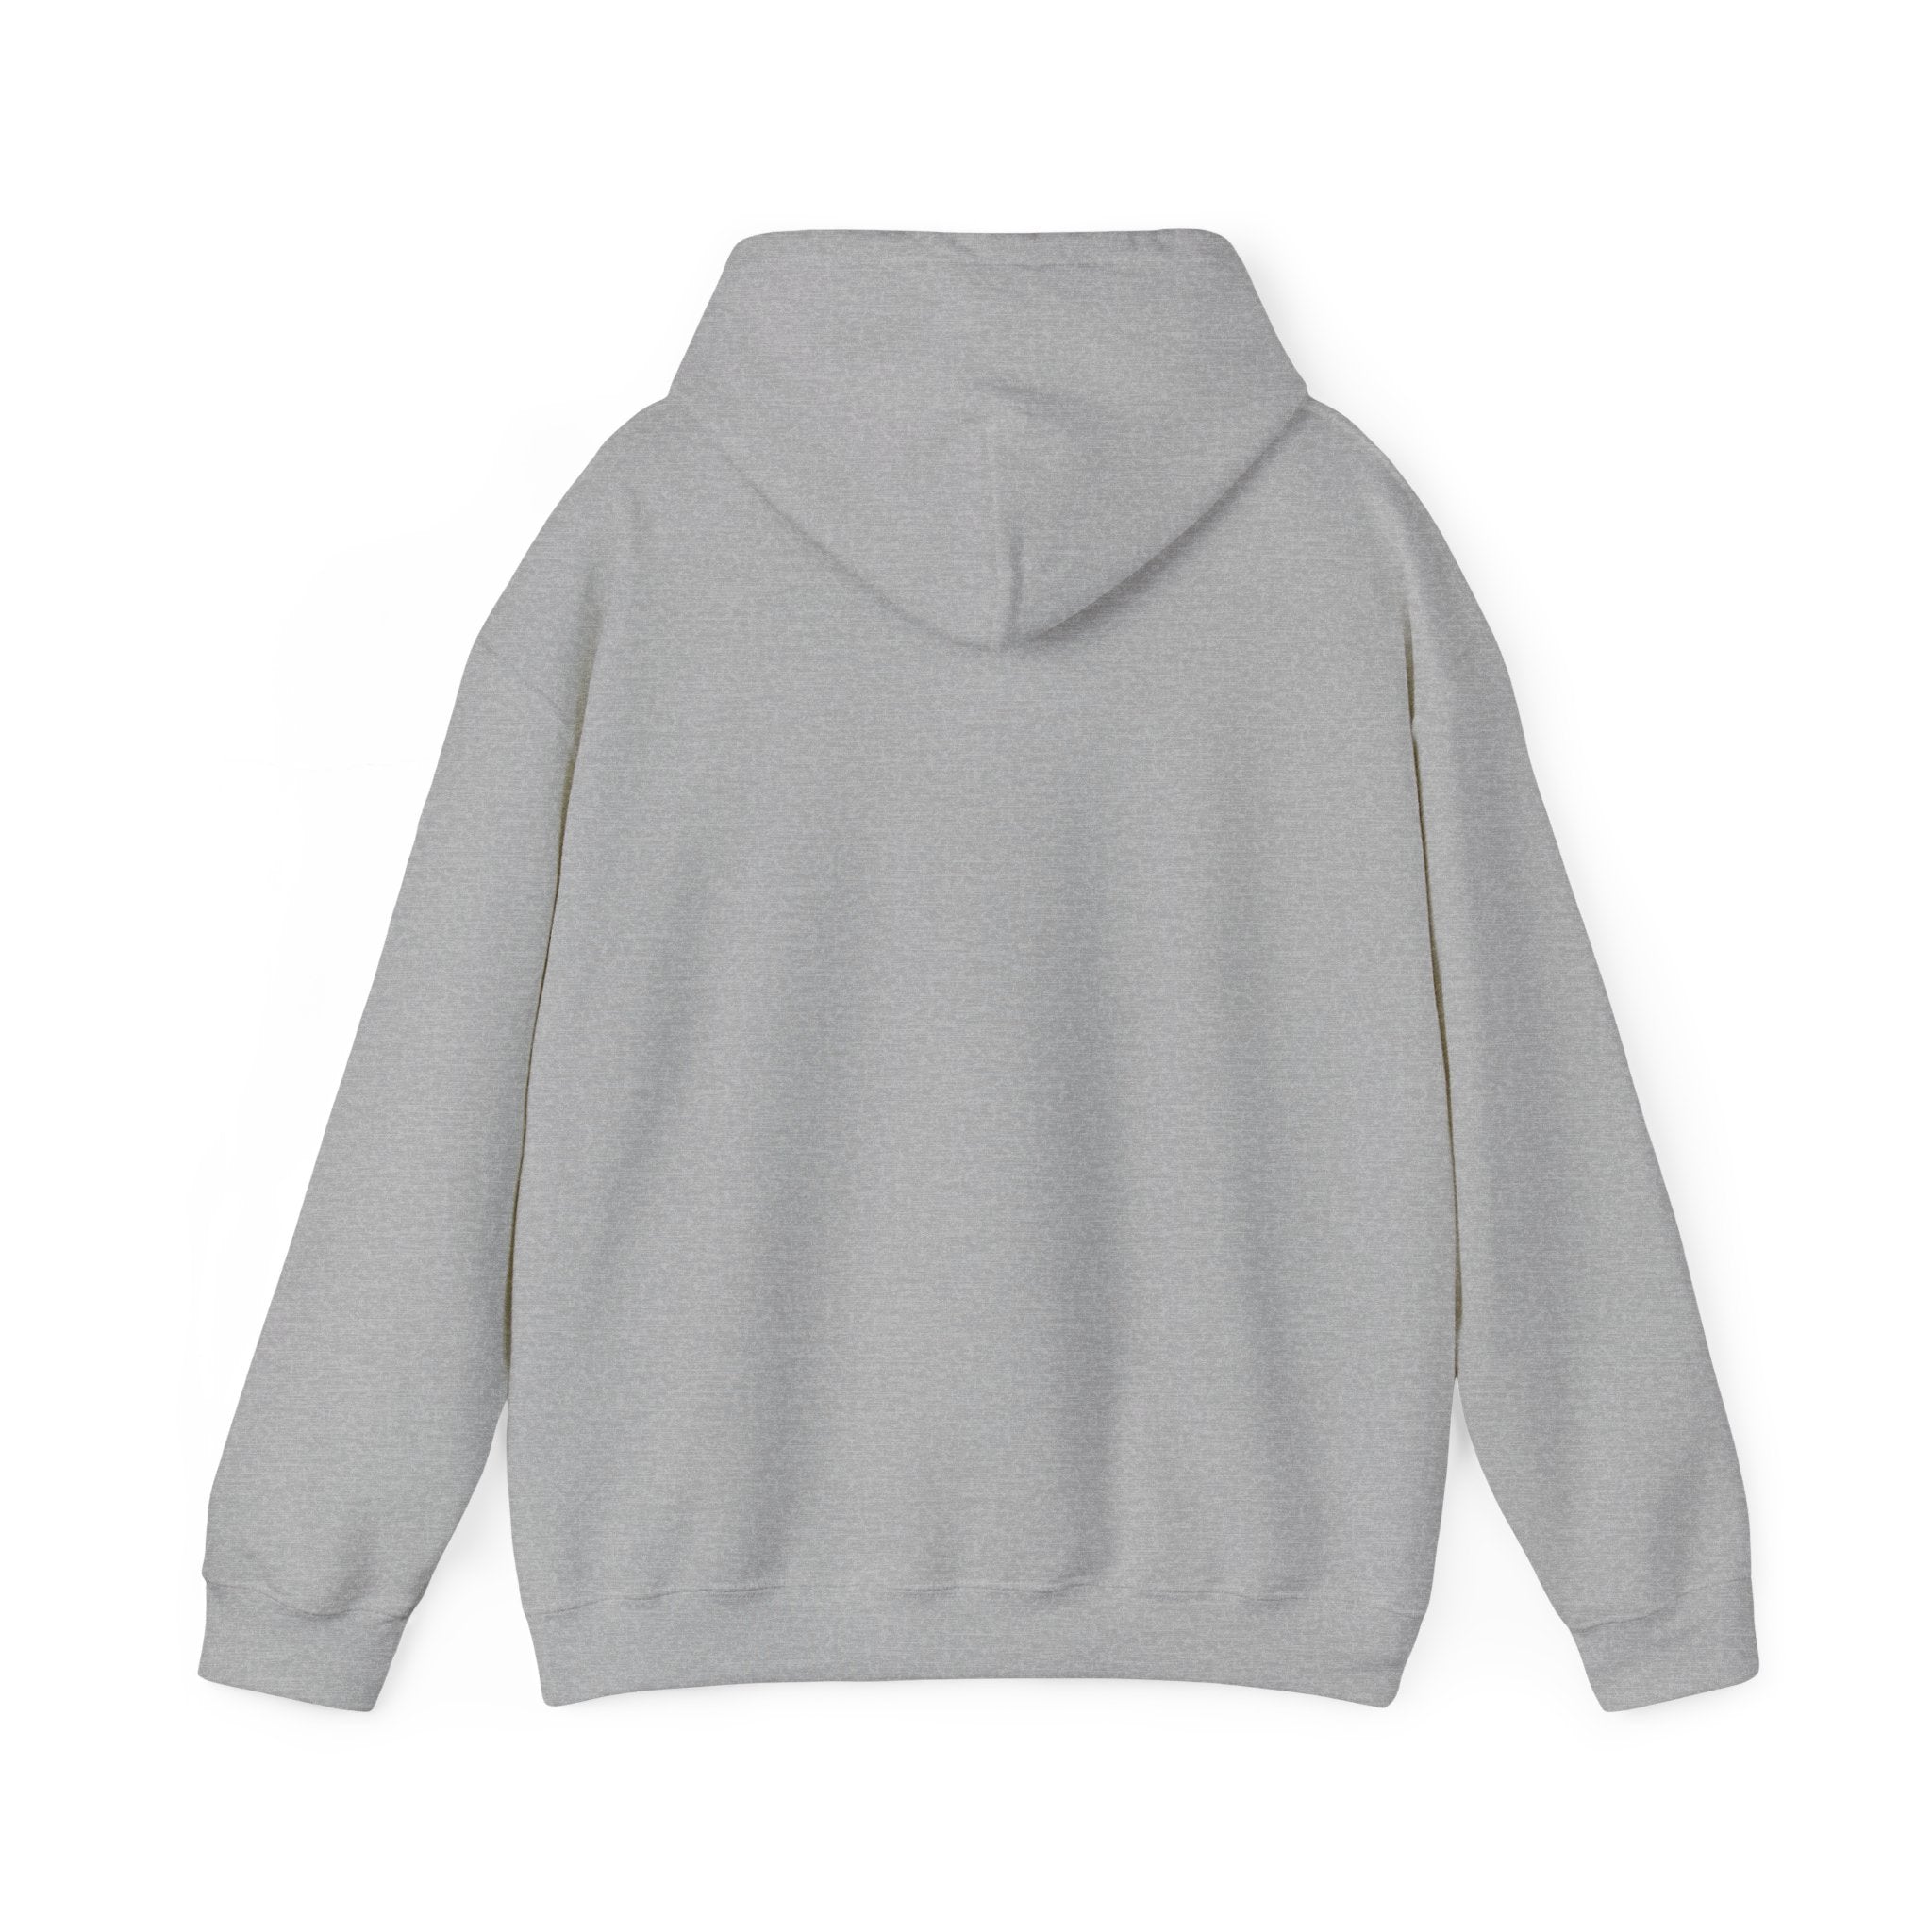 A gray, cozy **I am Older Than the Internet - Hooded Sweatshirt** with long sleeves, shown from the back, embodies a timeless style that feels older than the internet.